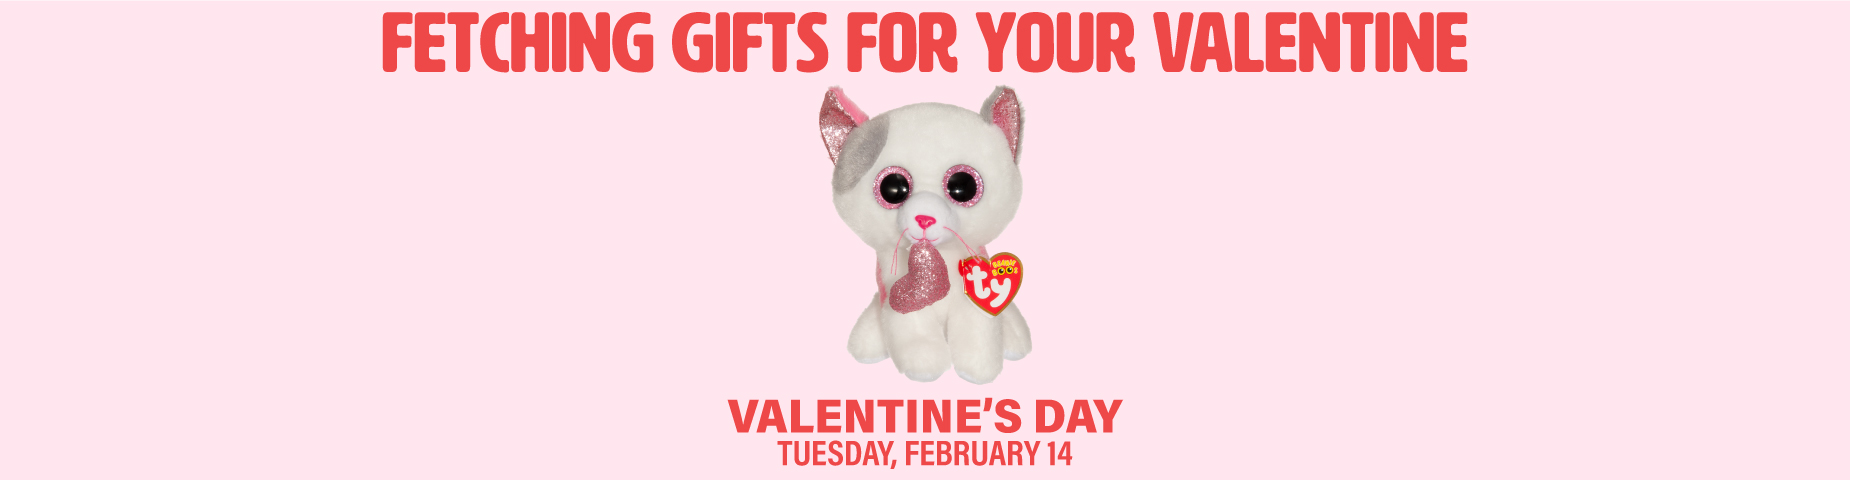 FETCHING GIFTS FOR YOUR VALENTINE: Valentine's Day: Tuesday, February 14